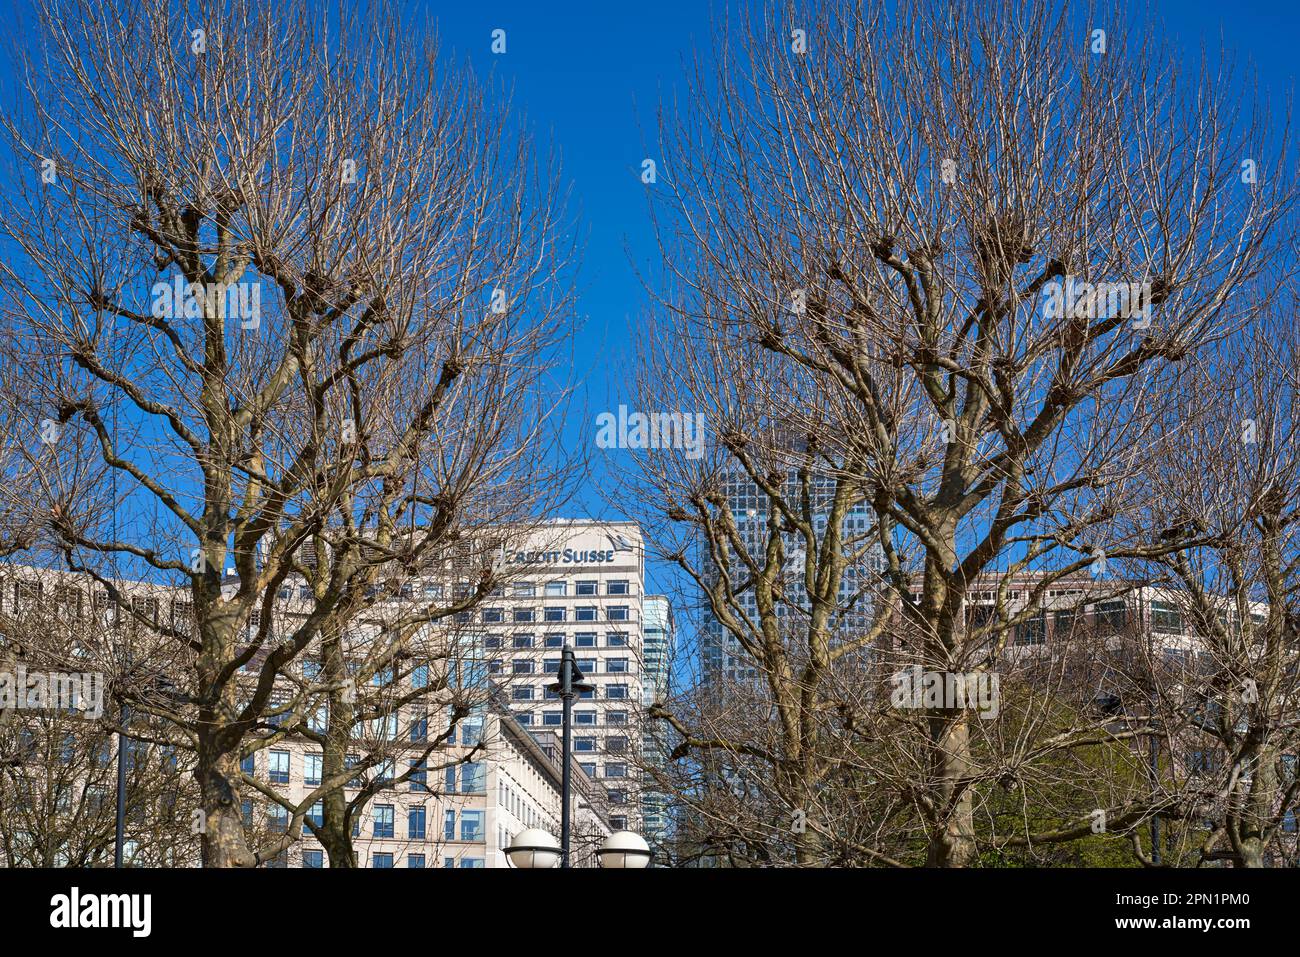 The Credit Suisse building through the trees at Canary Wharf on the Isle of Dogs, East London UK Stock Photo